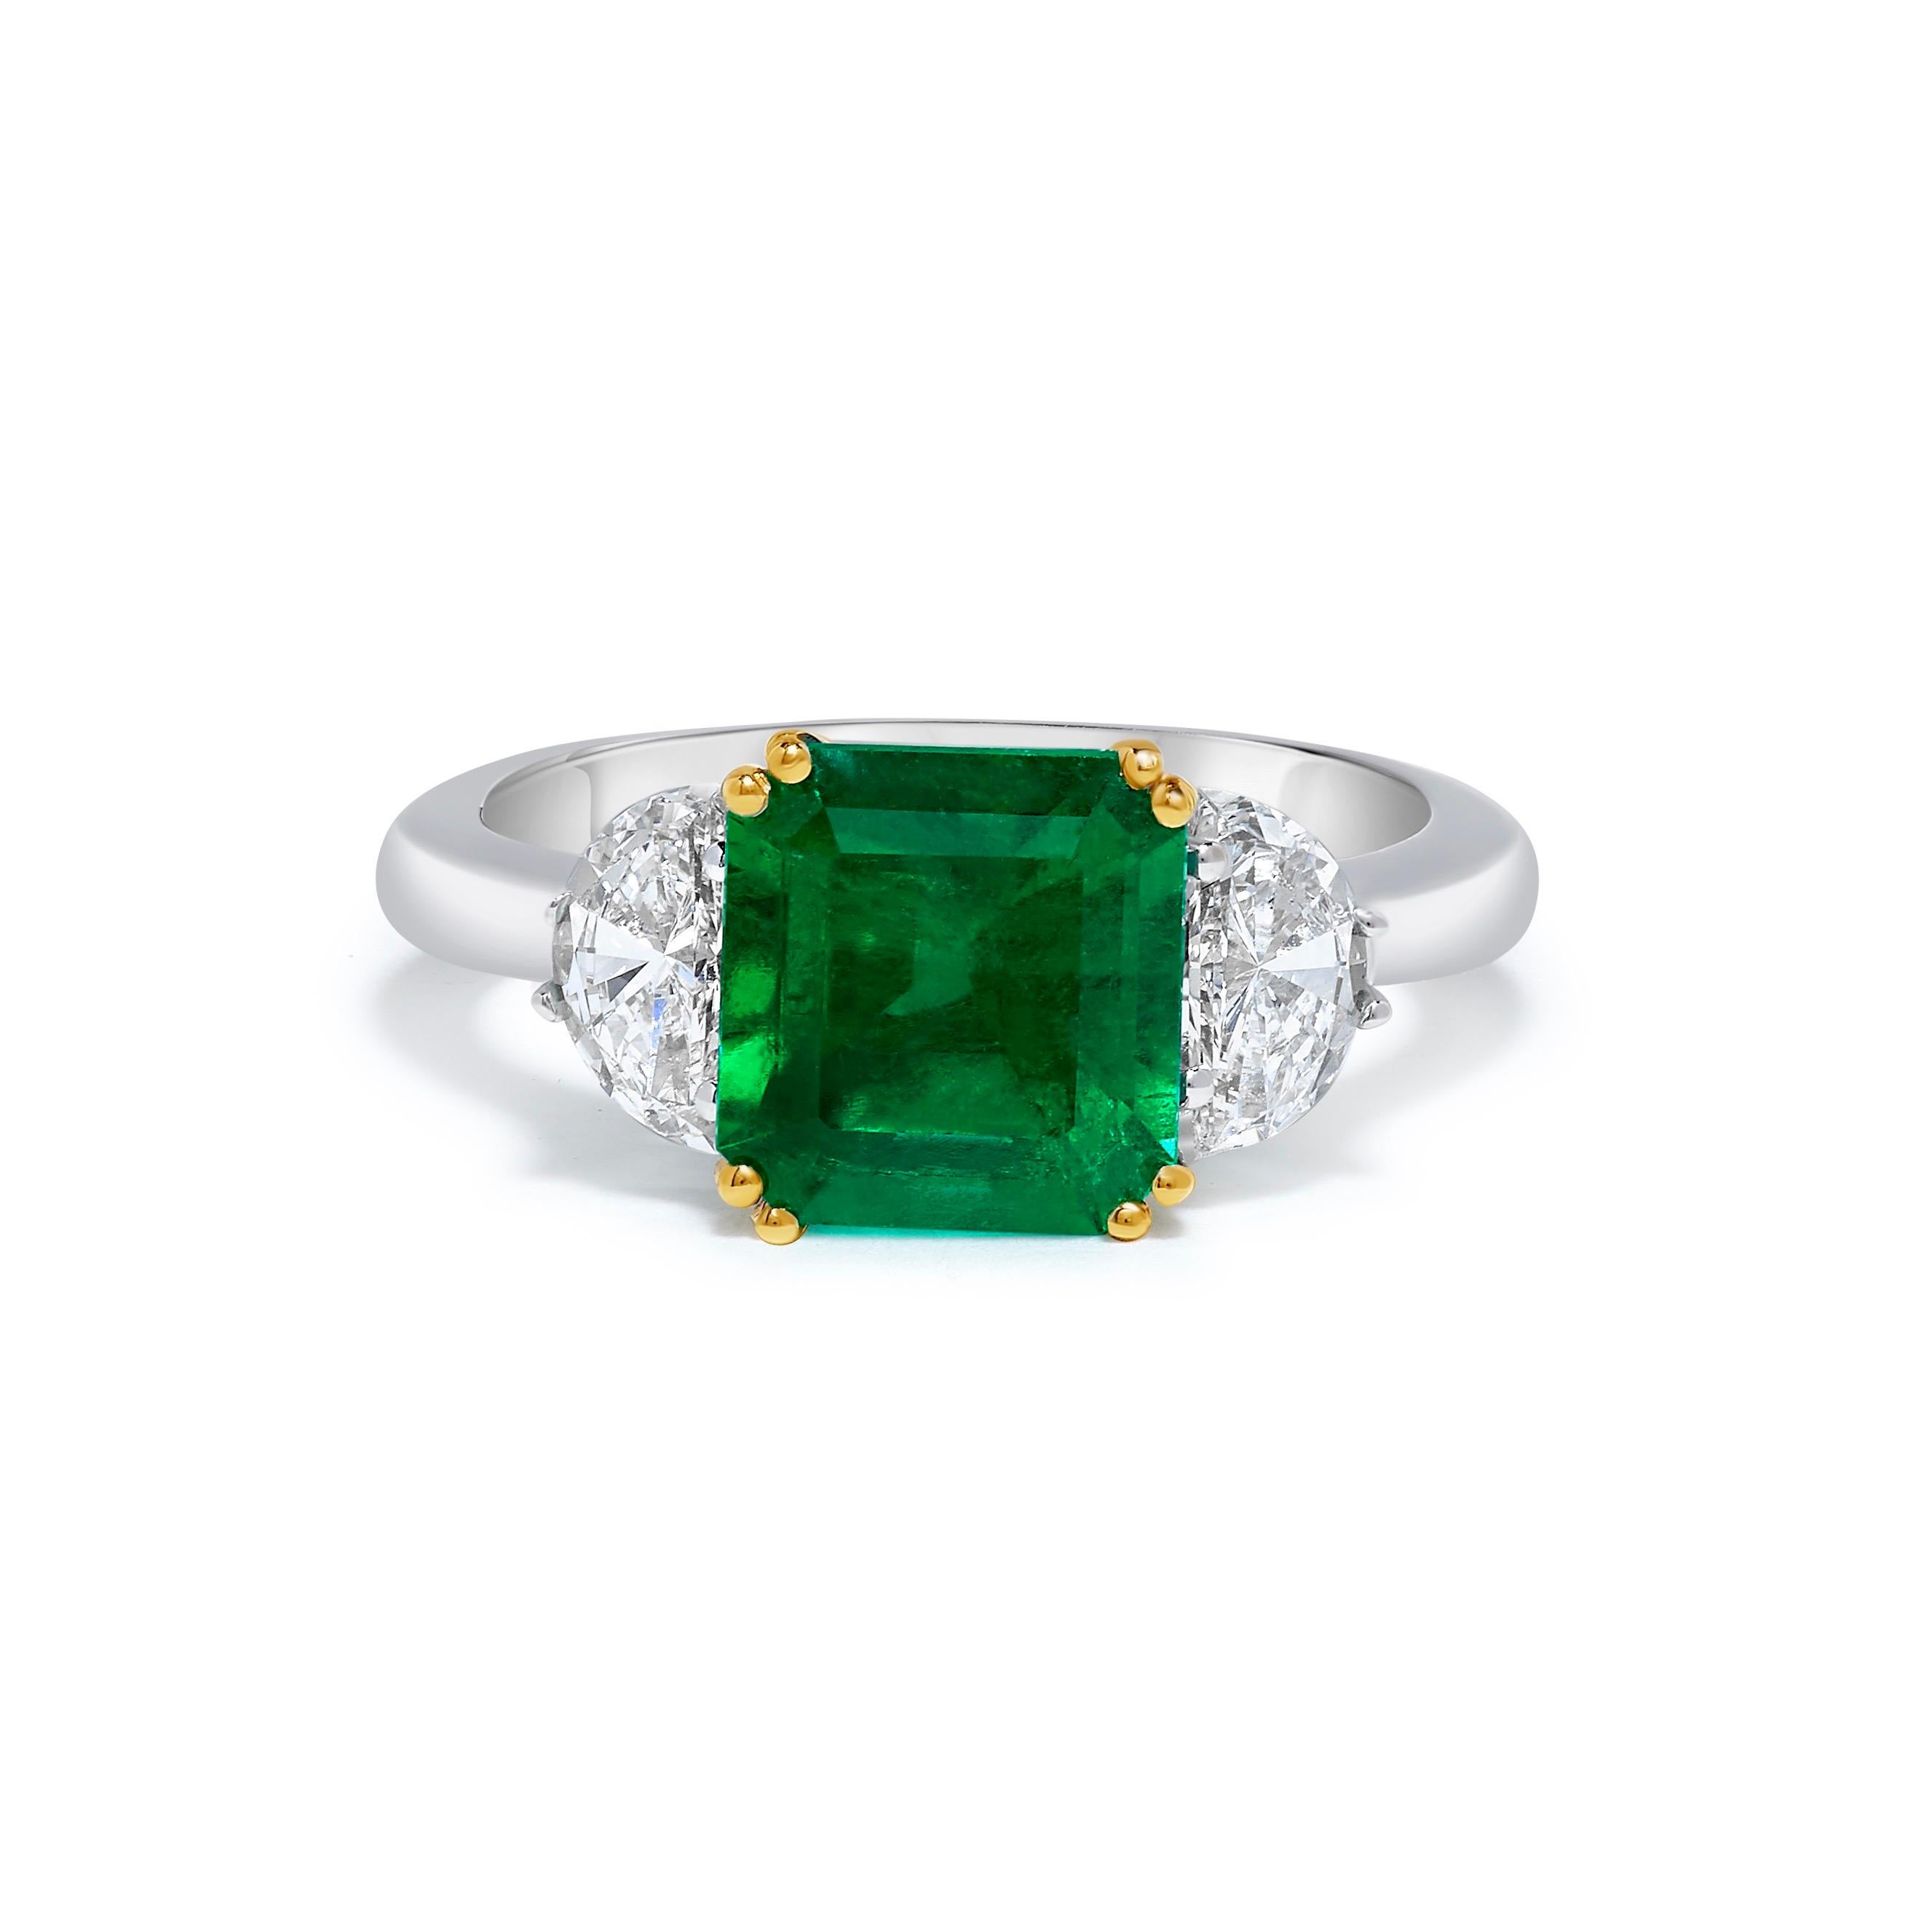 From the vault at Emilio Jewelry New York,
A Colombian Emerald of exceptional quality set in the center. For those who want the very best in color, clarity, transparency this is the one! Please inquire for details.
Center emerald:2.83 cts
Diamonds